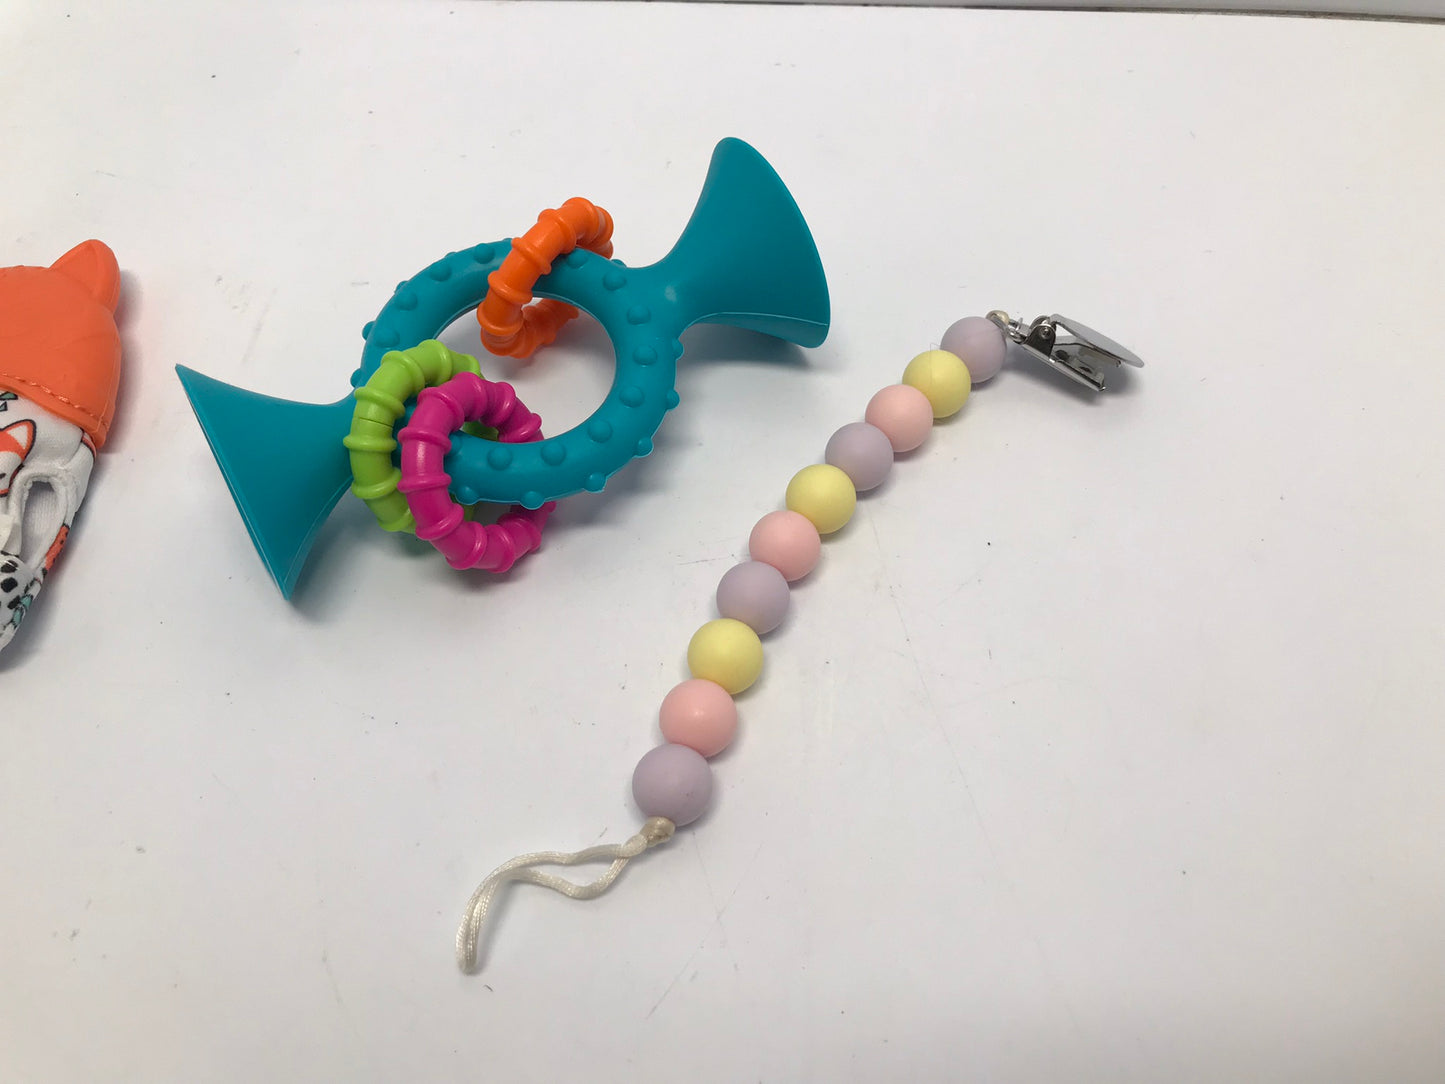 Itzy Rizy Baby Spoon, Fat Brain Teether, Itzy Rizy Fox Glove Teether, Teether Bead Clip For Pacifier